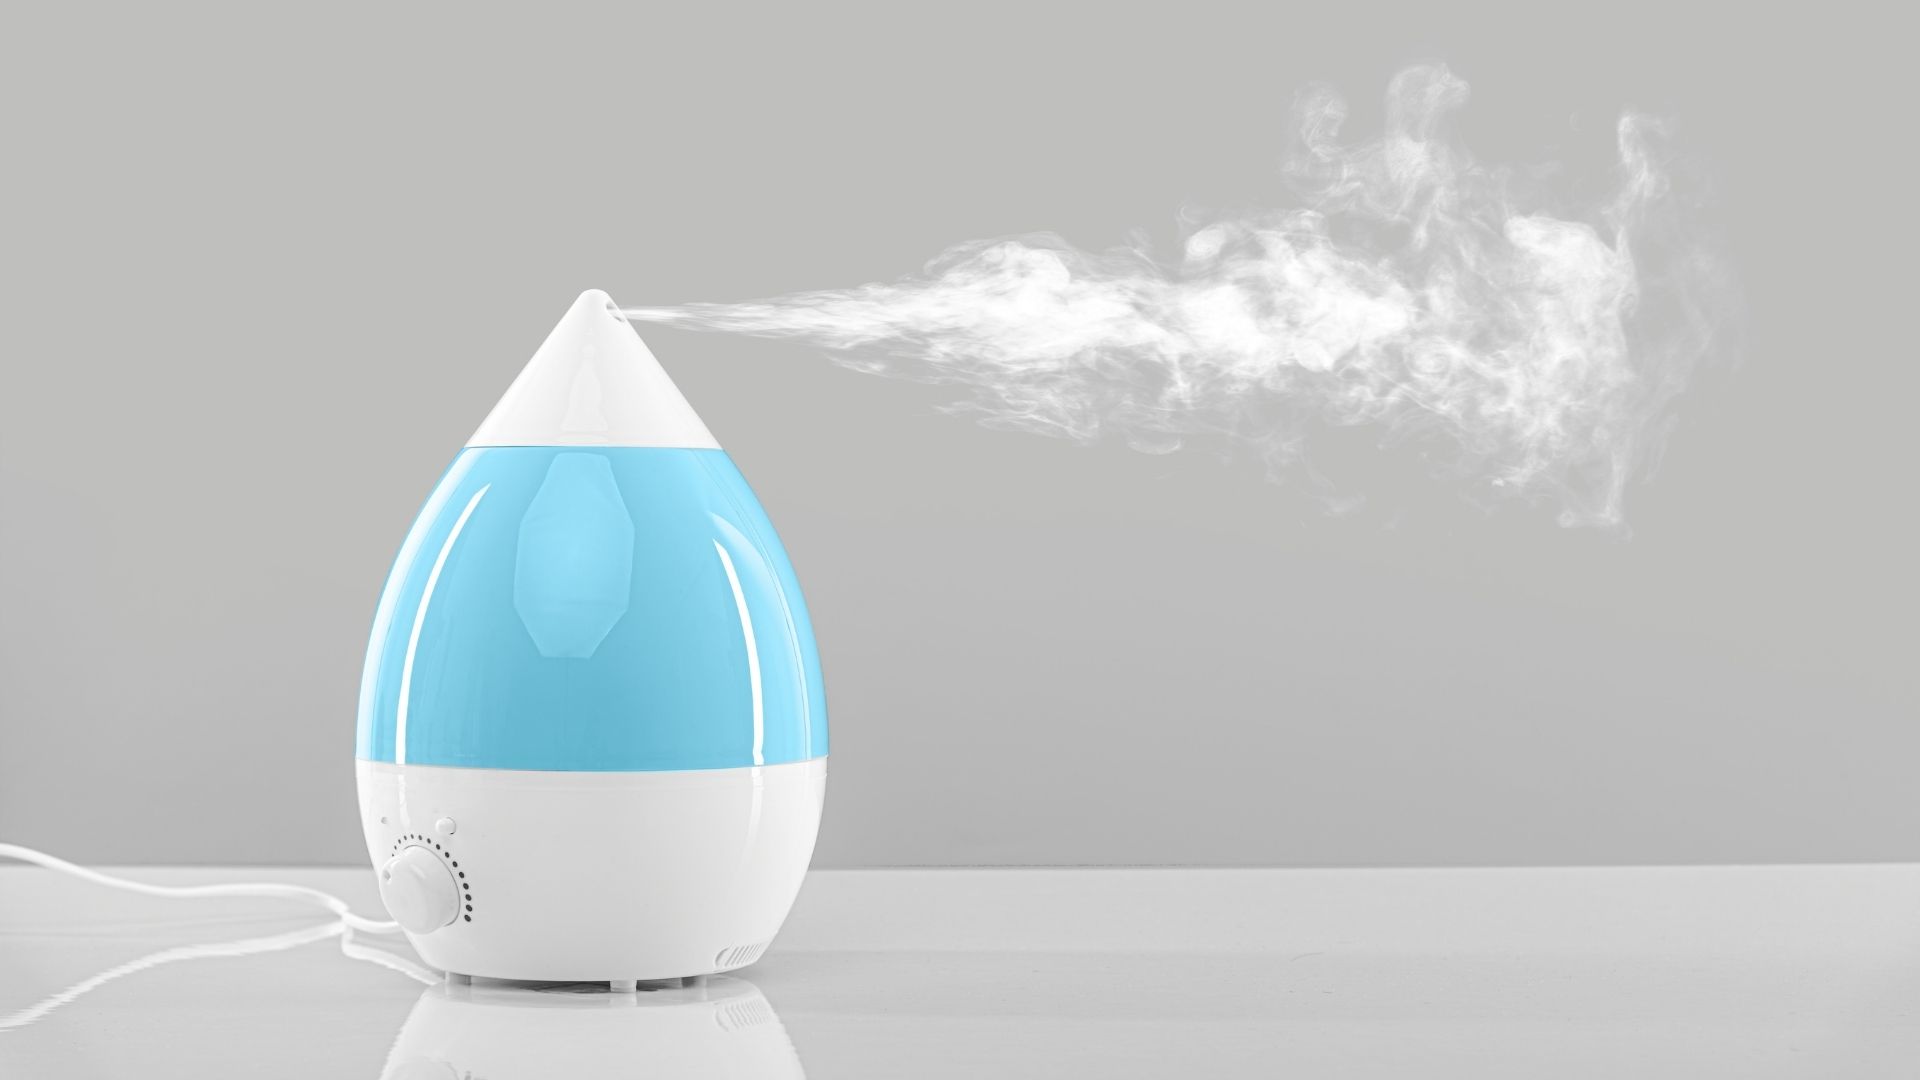 vicks humidifier red light fully filled, won't go off, keeps coming on, flashing green/orang/blue light